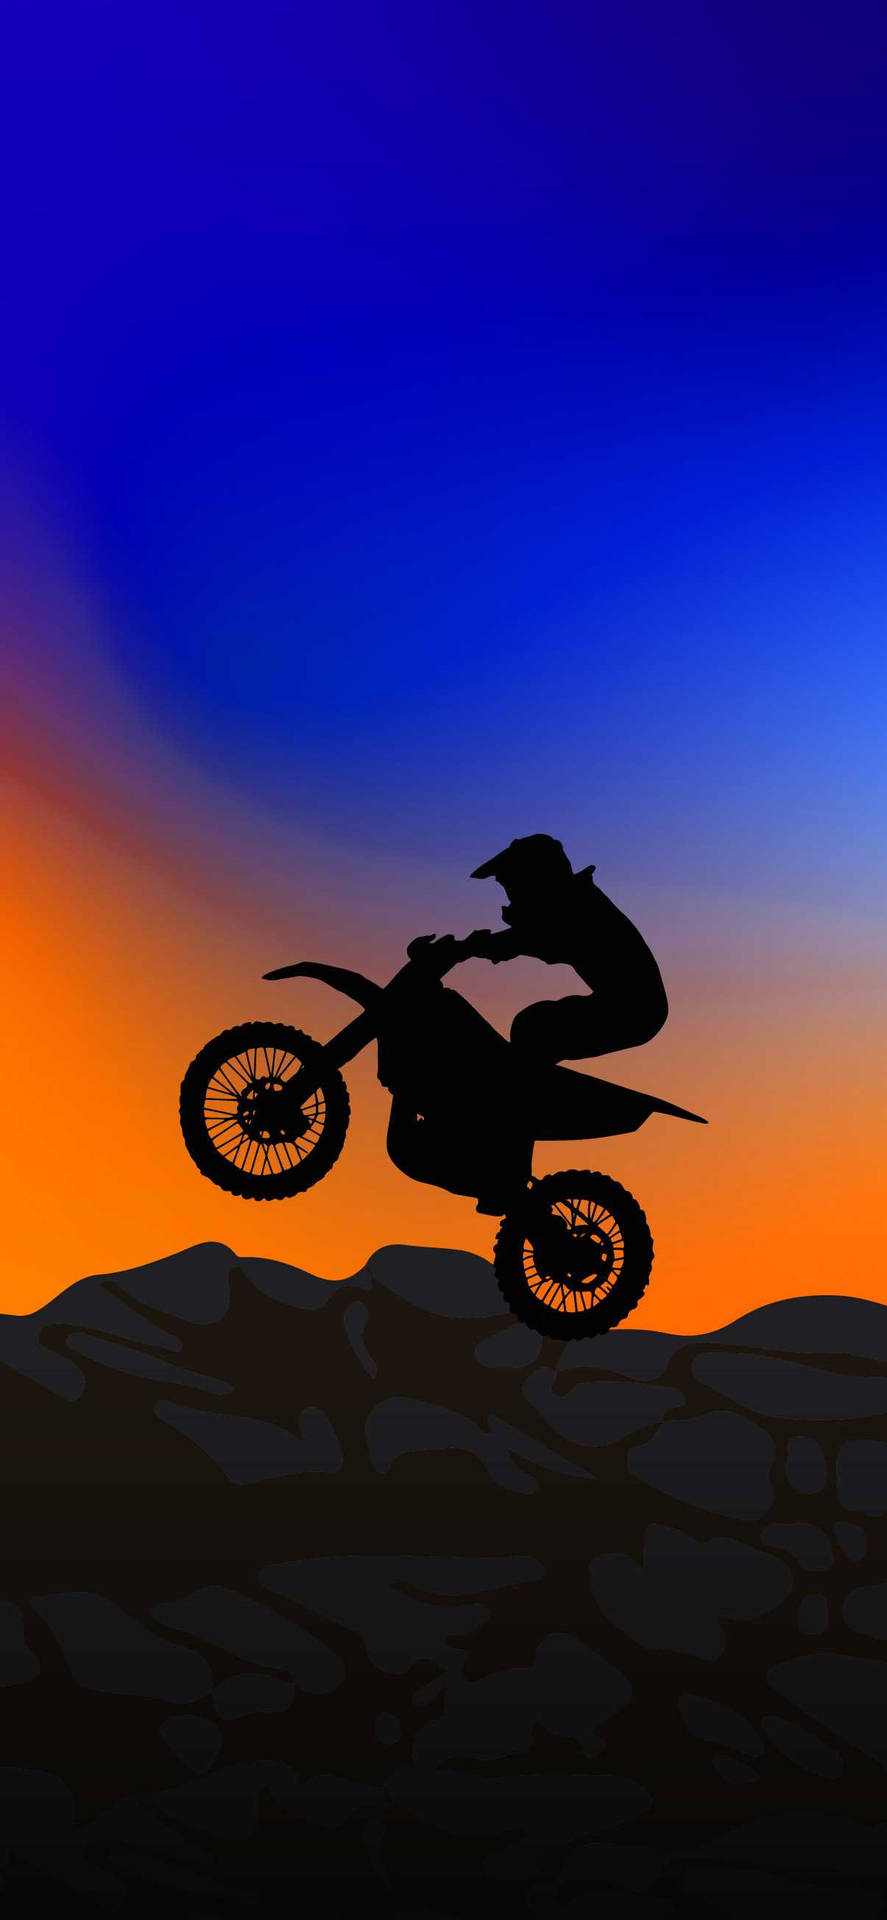 Caption: Extreme Thrill - Dirt Bike Silhouette Taking Flight At Sunset Background